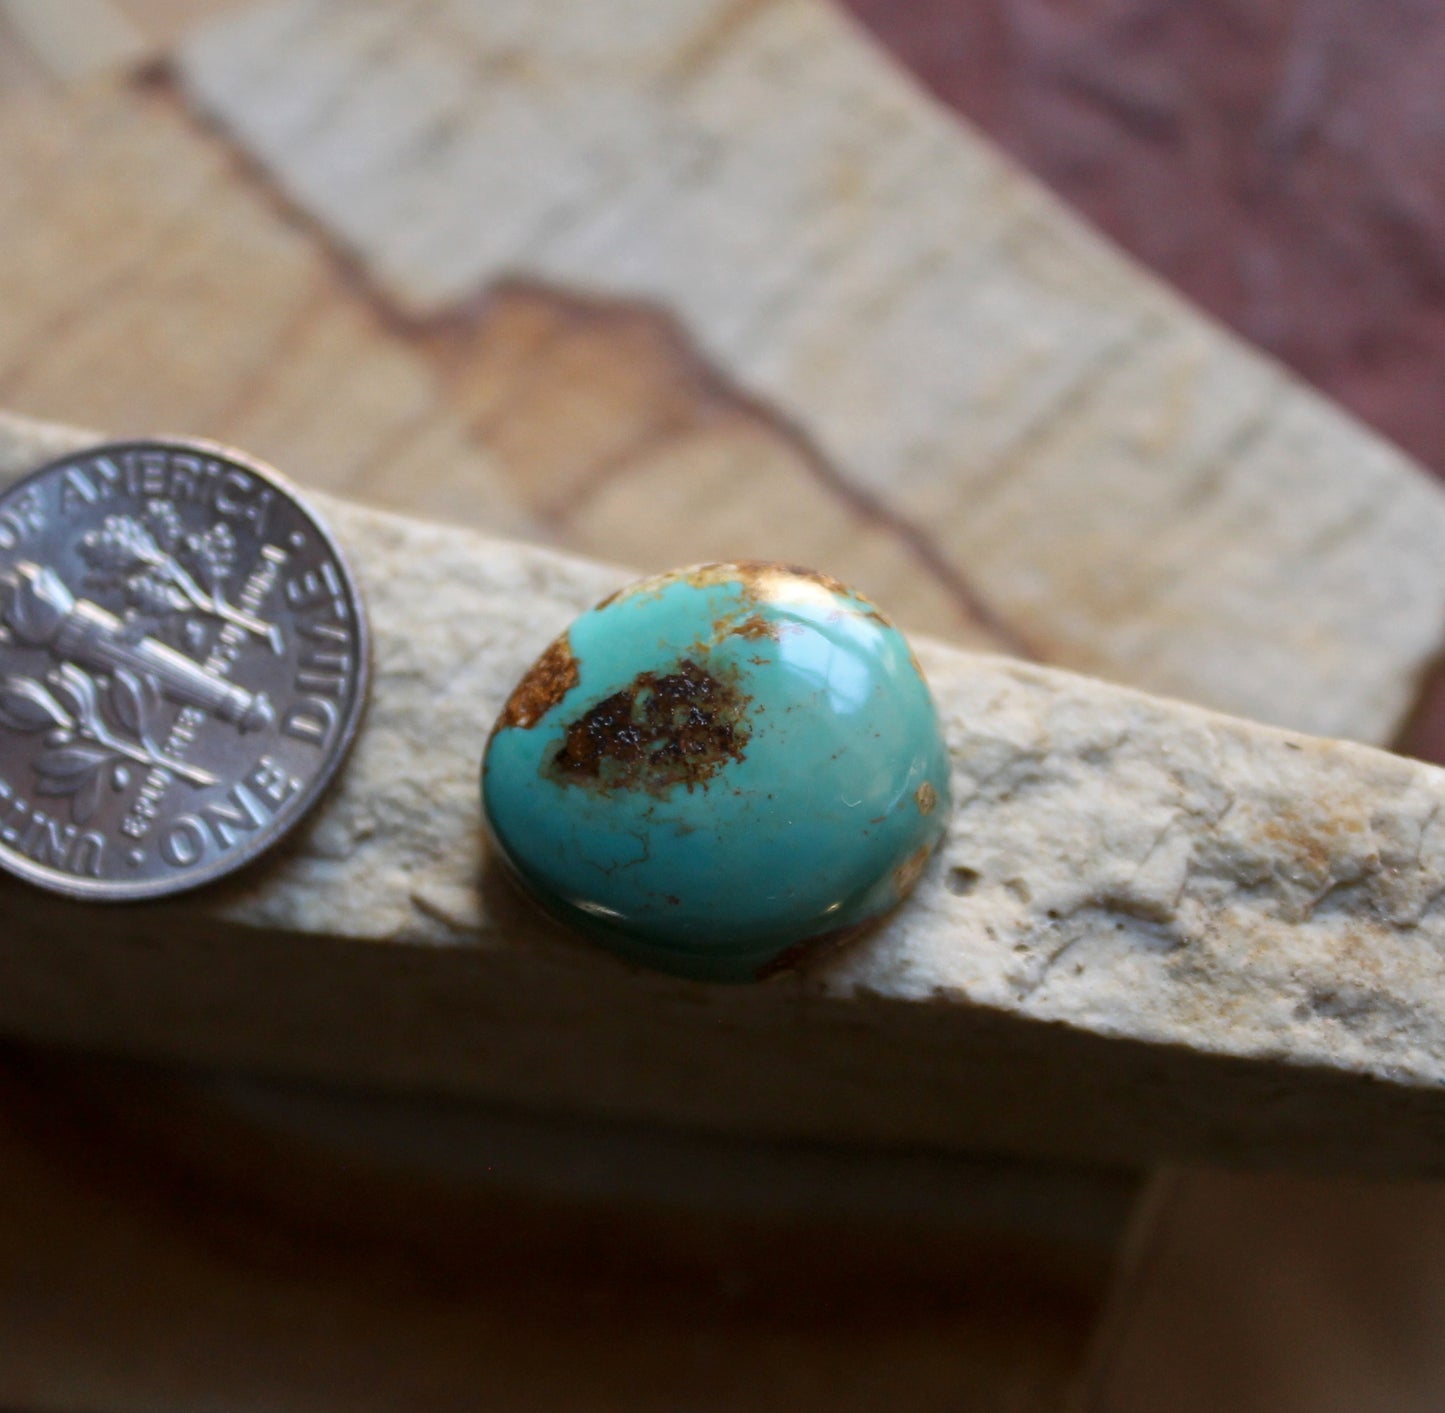 11 carat teal blue Stone Mountain Turquoise cabochon